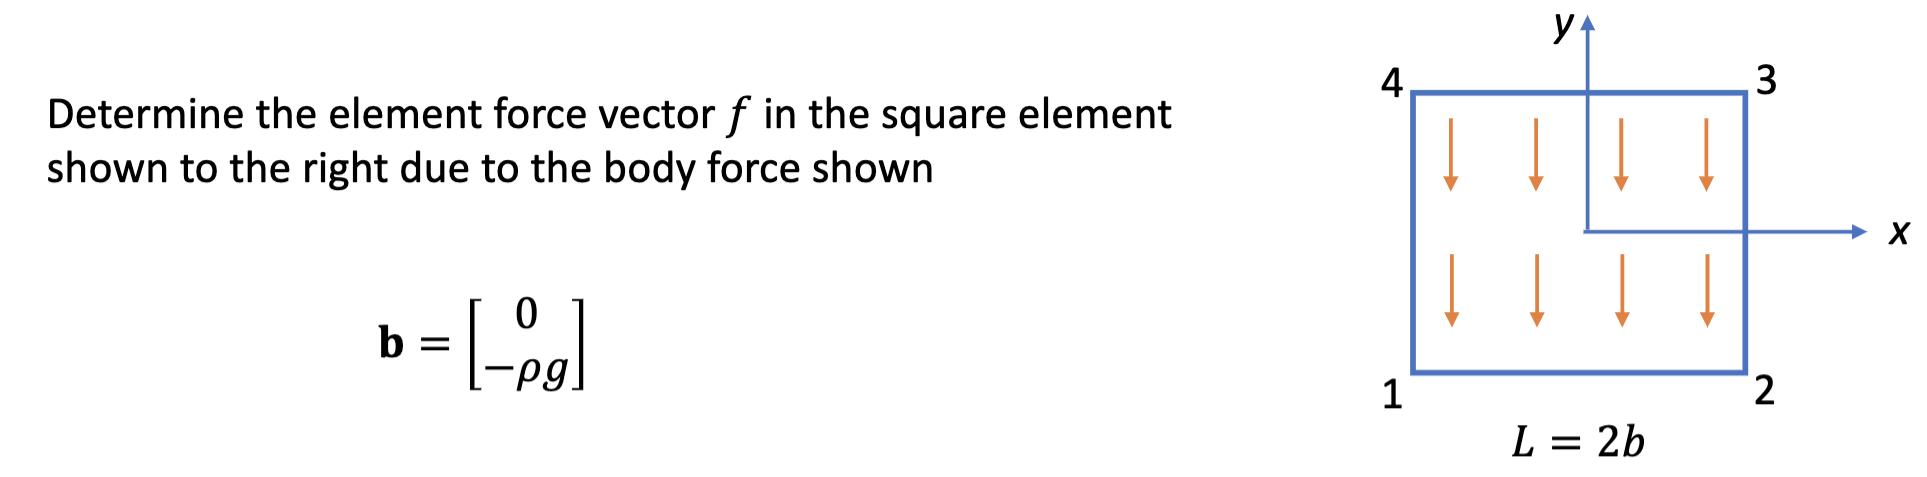 Determine the element force vector f in the square element shown to the right due to the body force shown b =